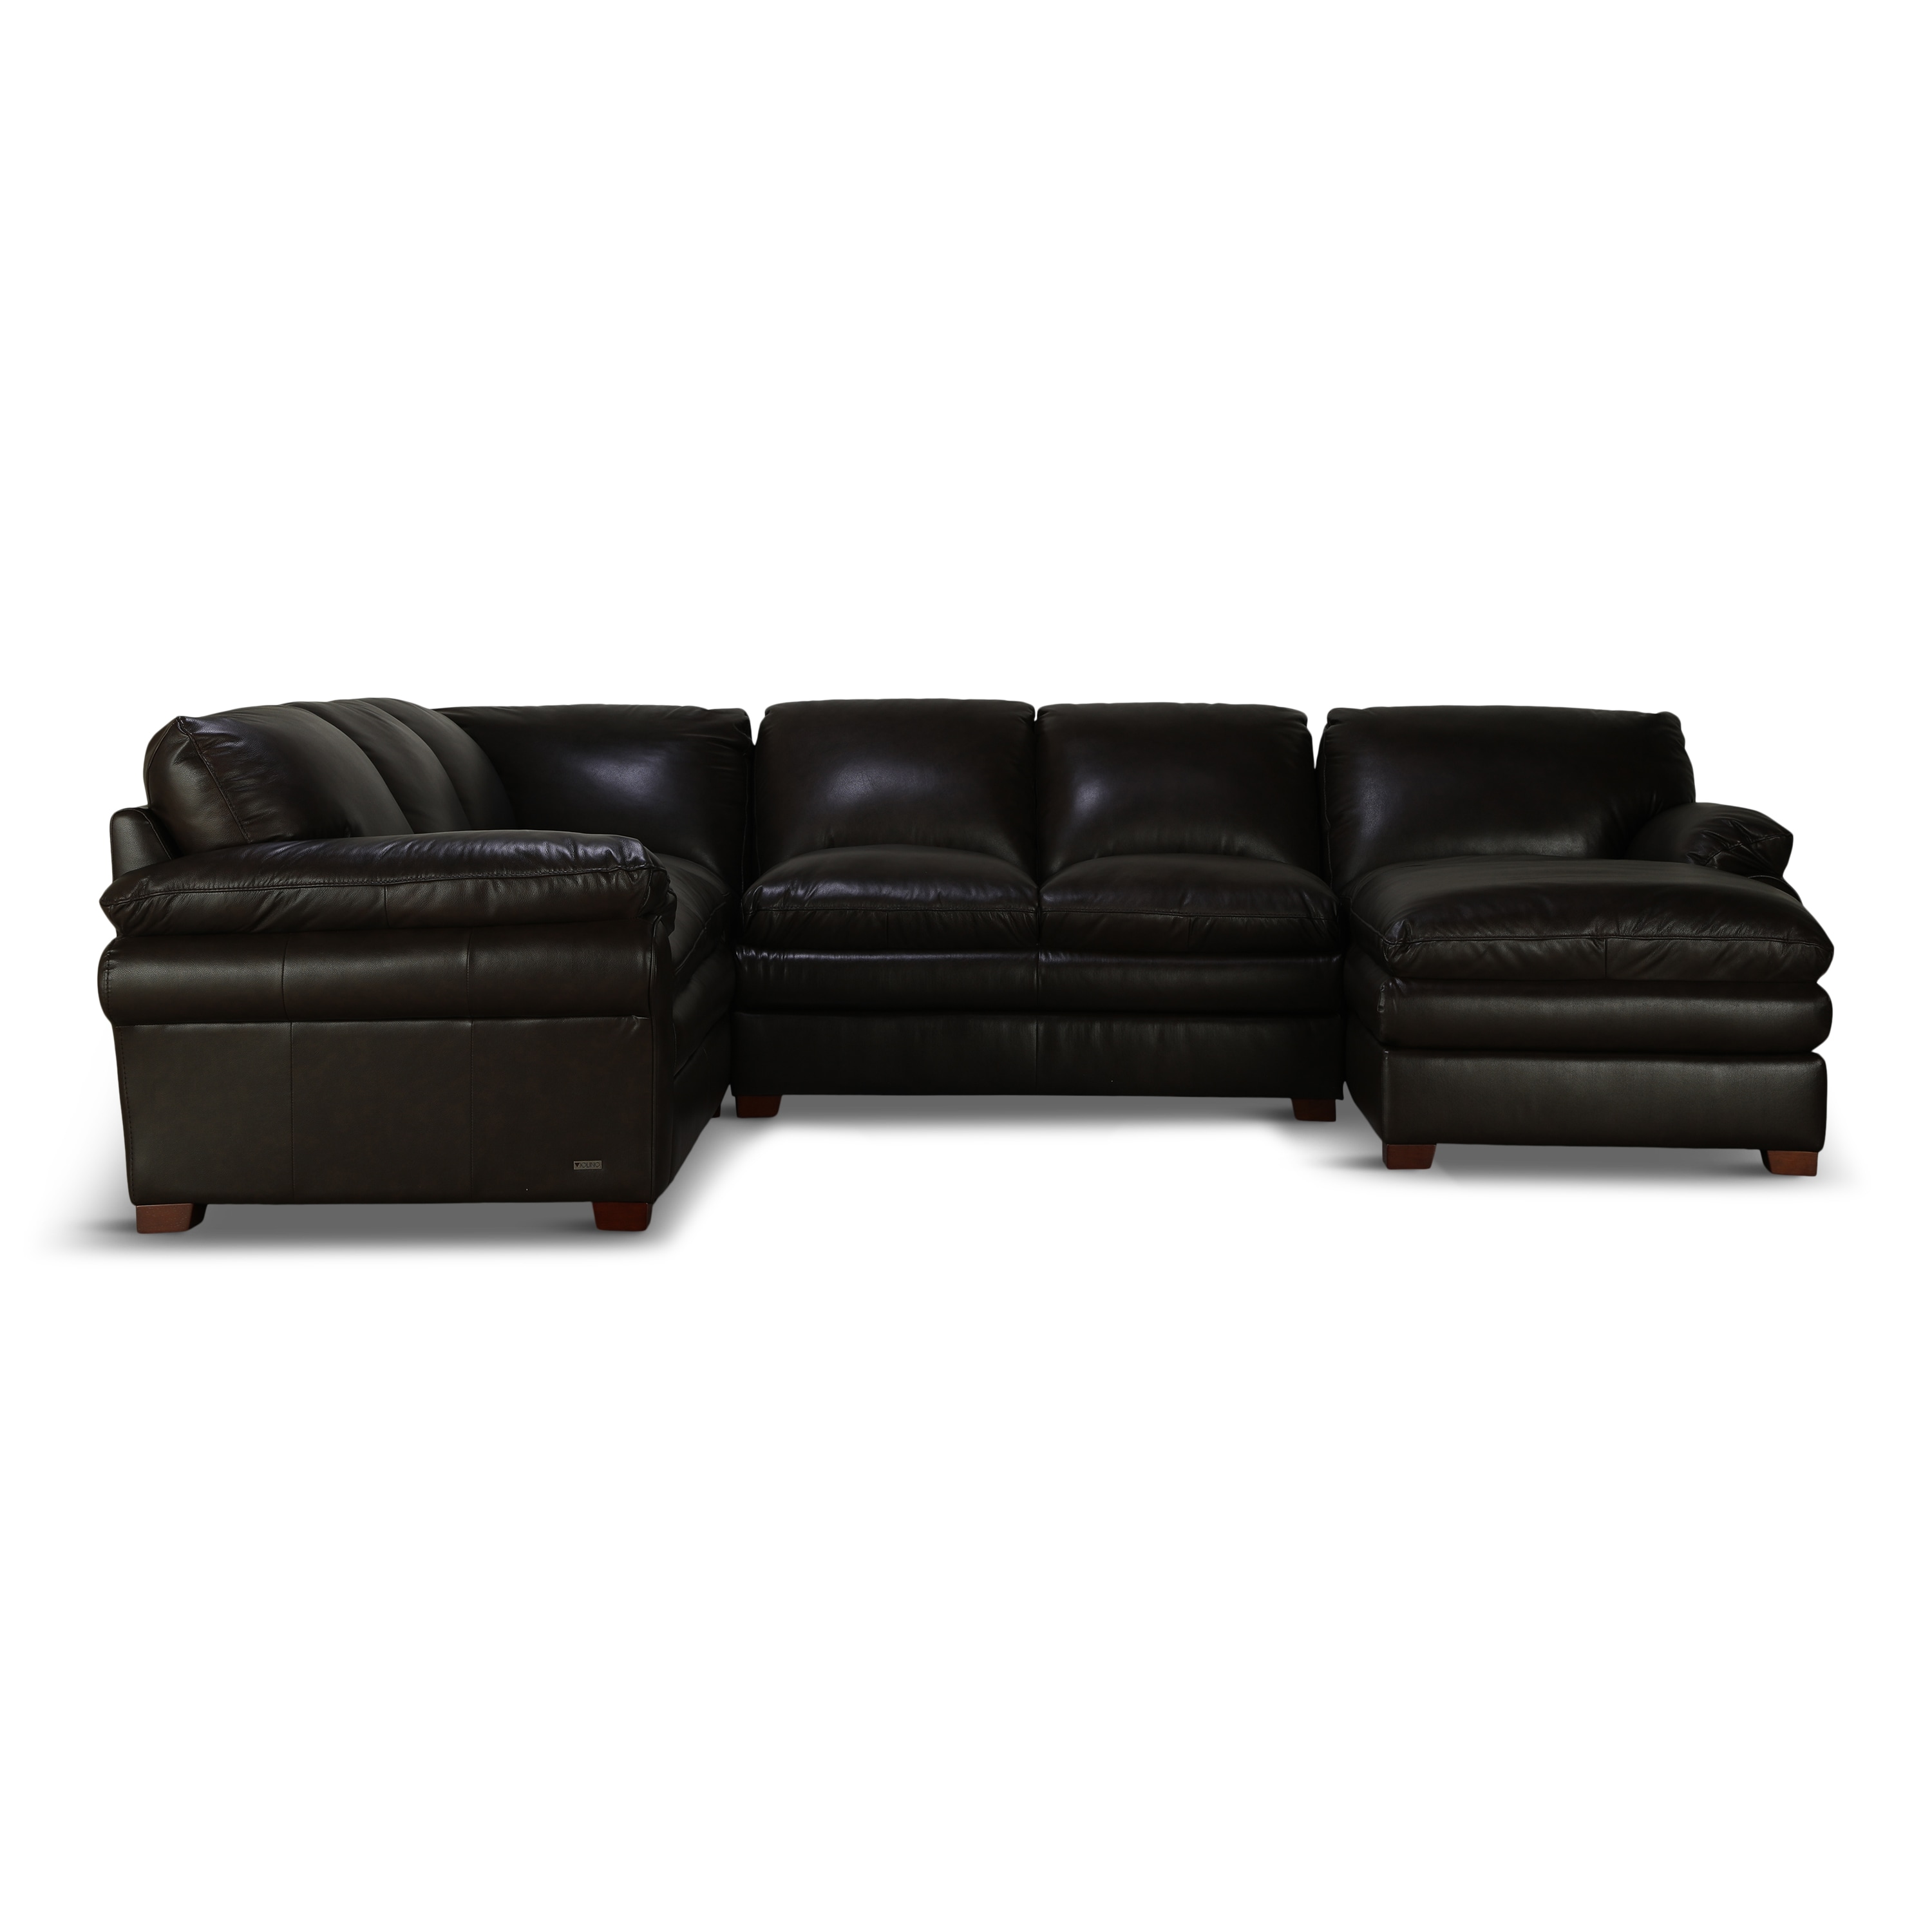 Rowan Brown Leather 3 Piece Sectional, Leather 3 Piece Sectional